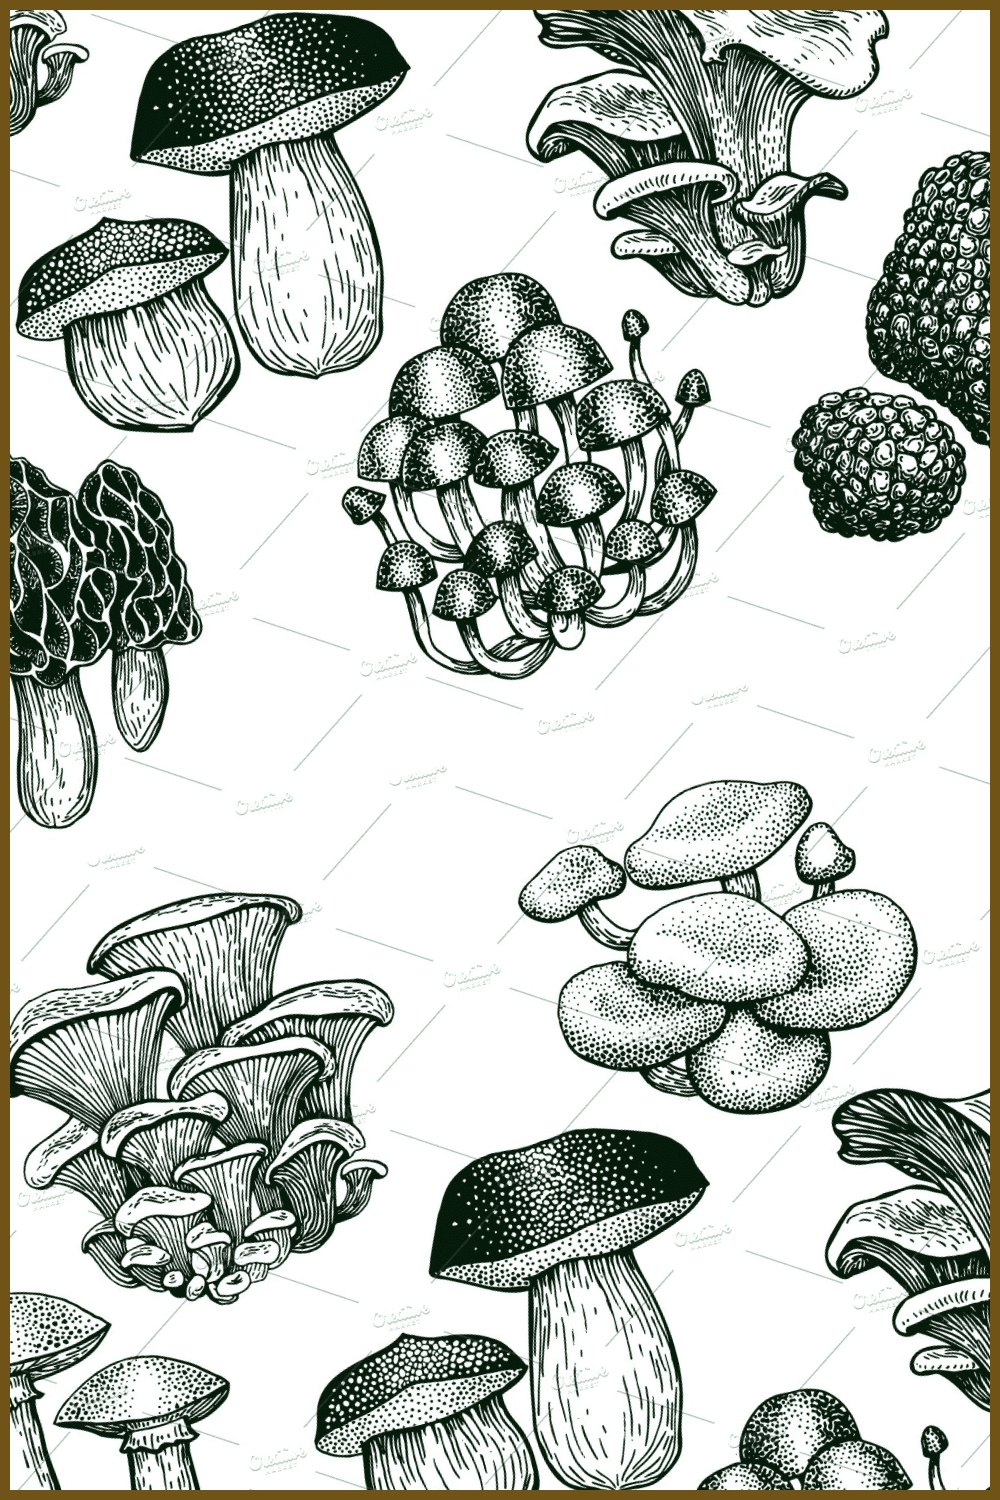 Mushrooms vector collection - pinterest image preview.